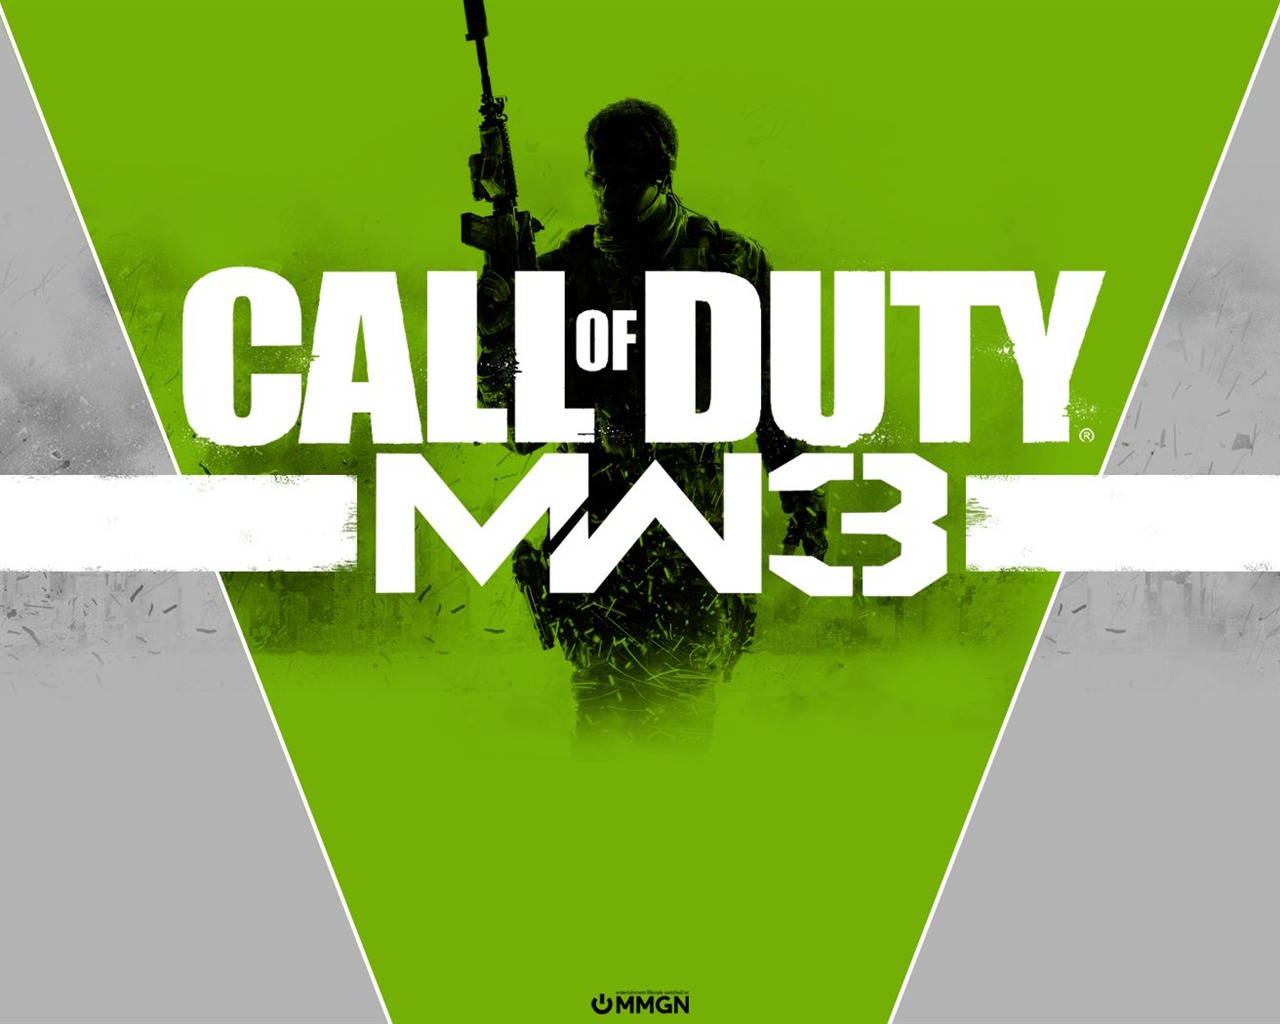 Call of Duty: MW3 wallpapers HD #10 - 1280x1024